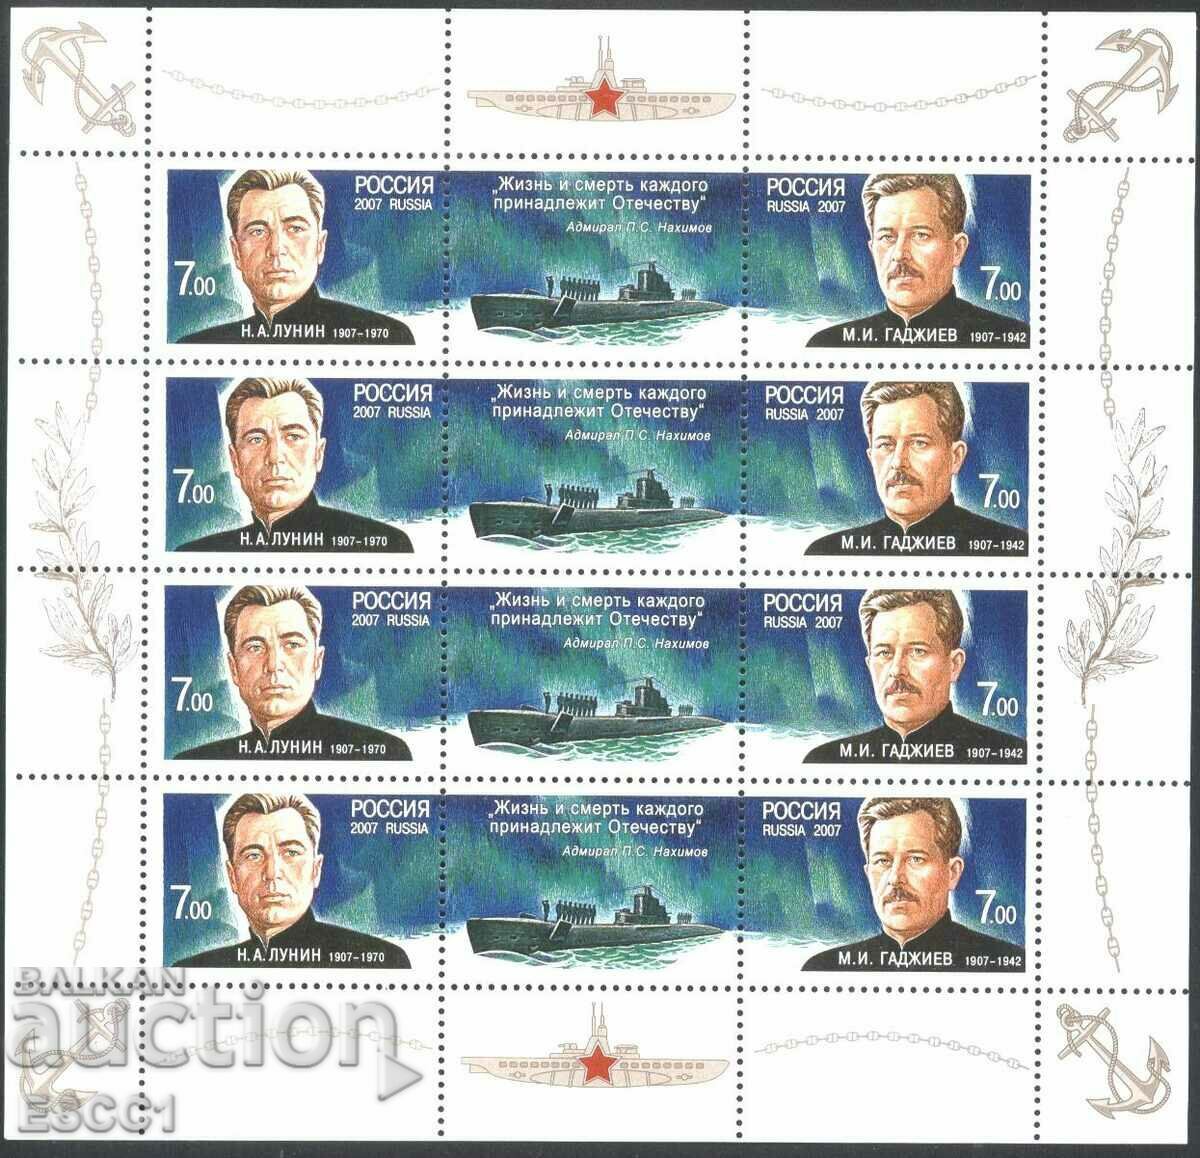 Clean stamps in small sheet Submarine Lunin Gadzhiev 2007 Russia